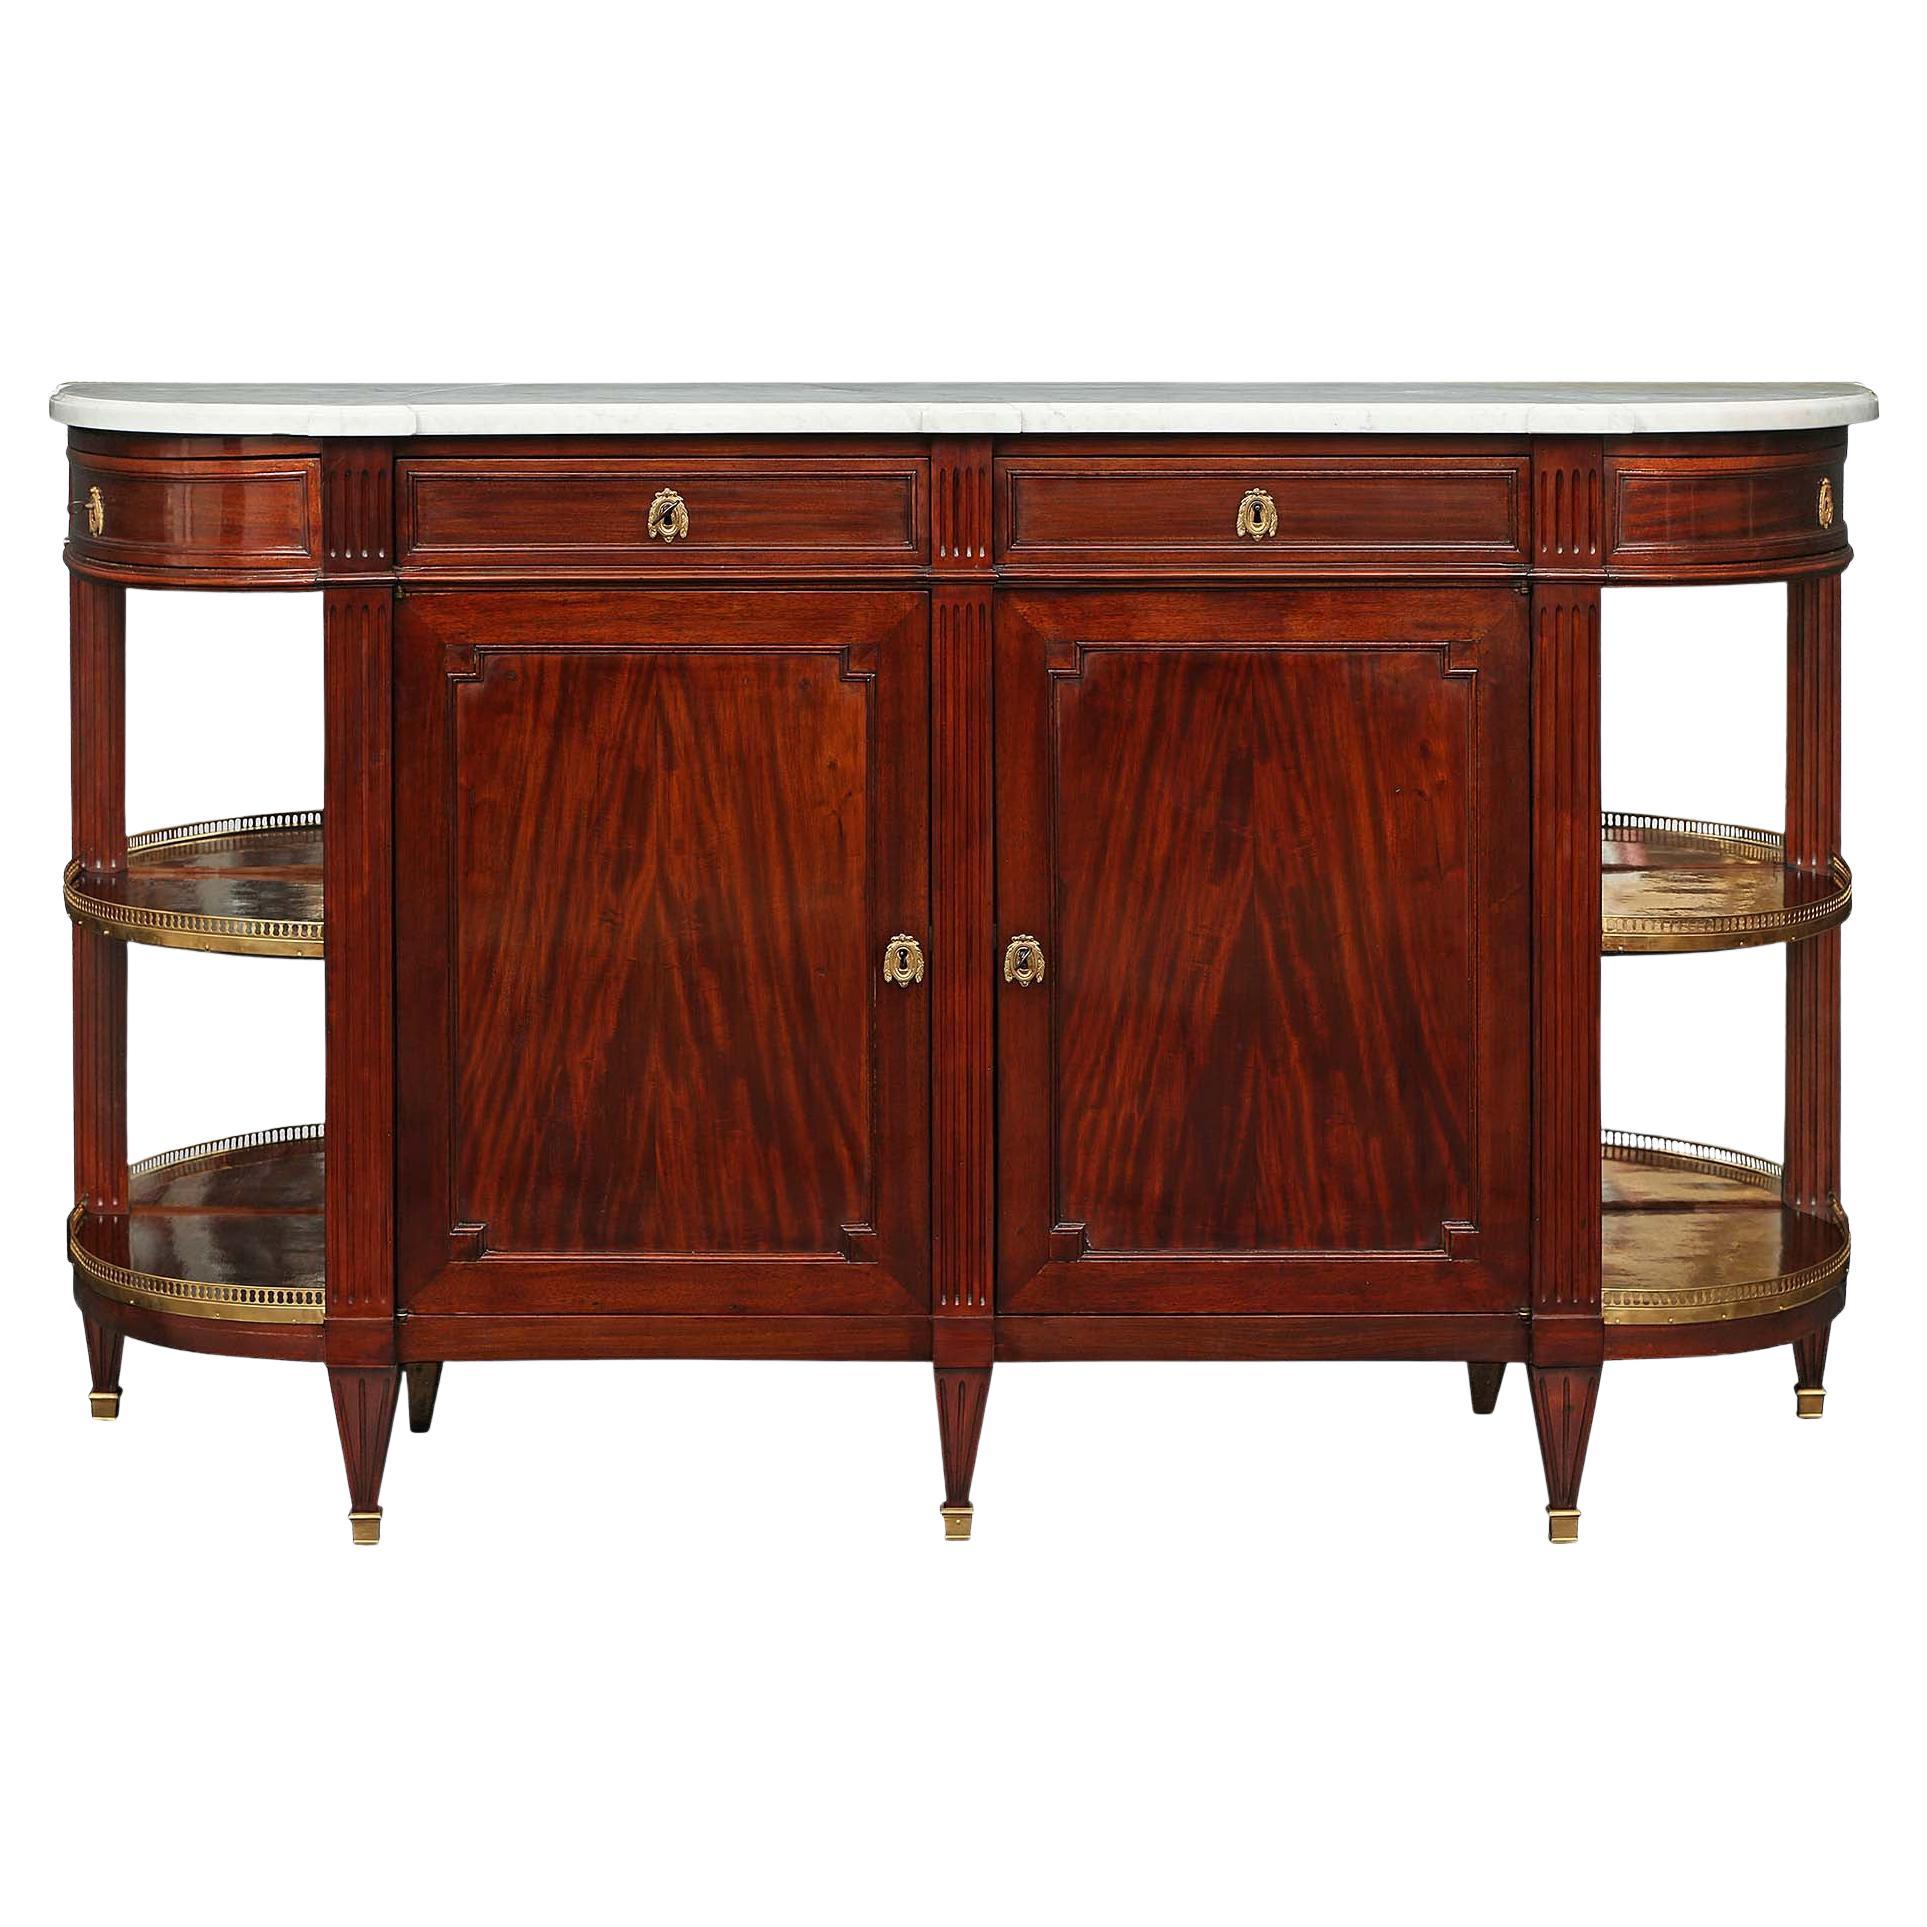 French 19th Century Louis XVI Style Mahogany Buffet with Marble Top